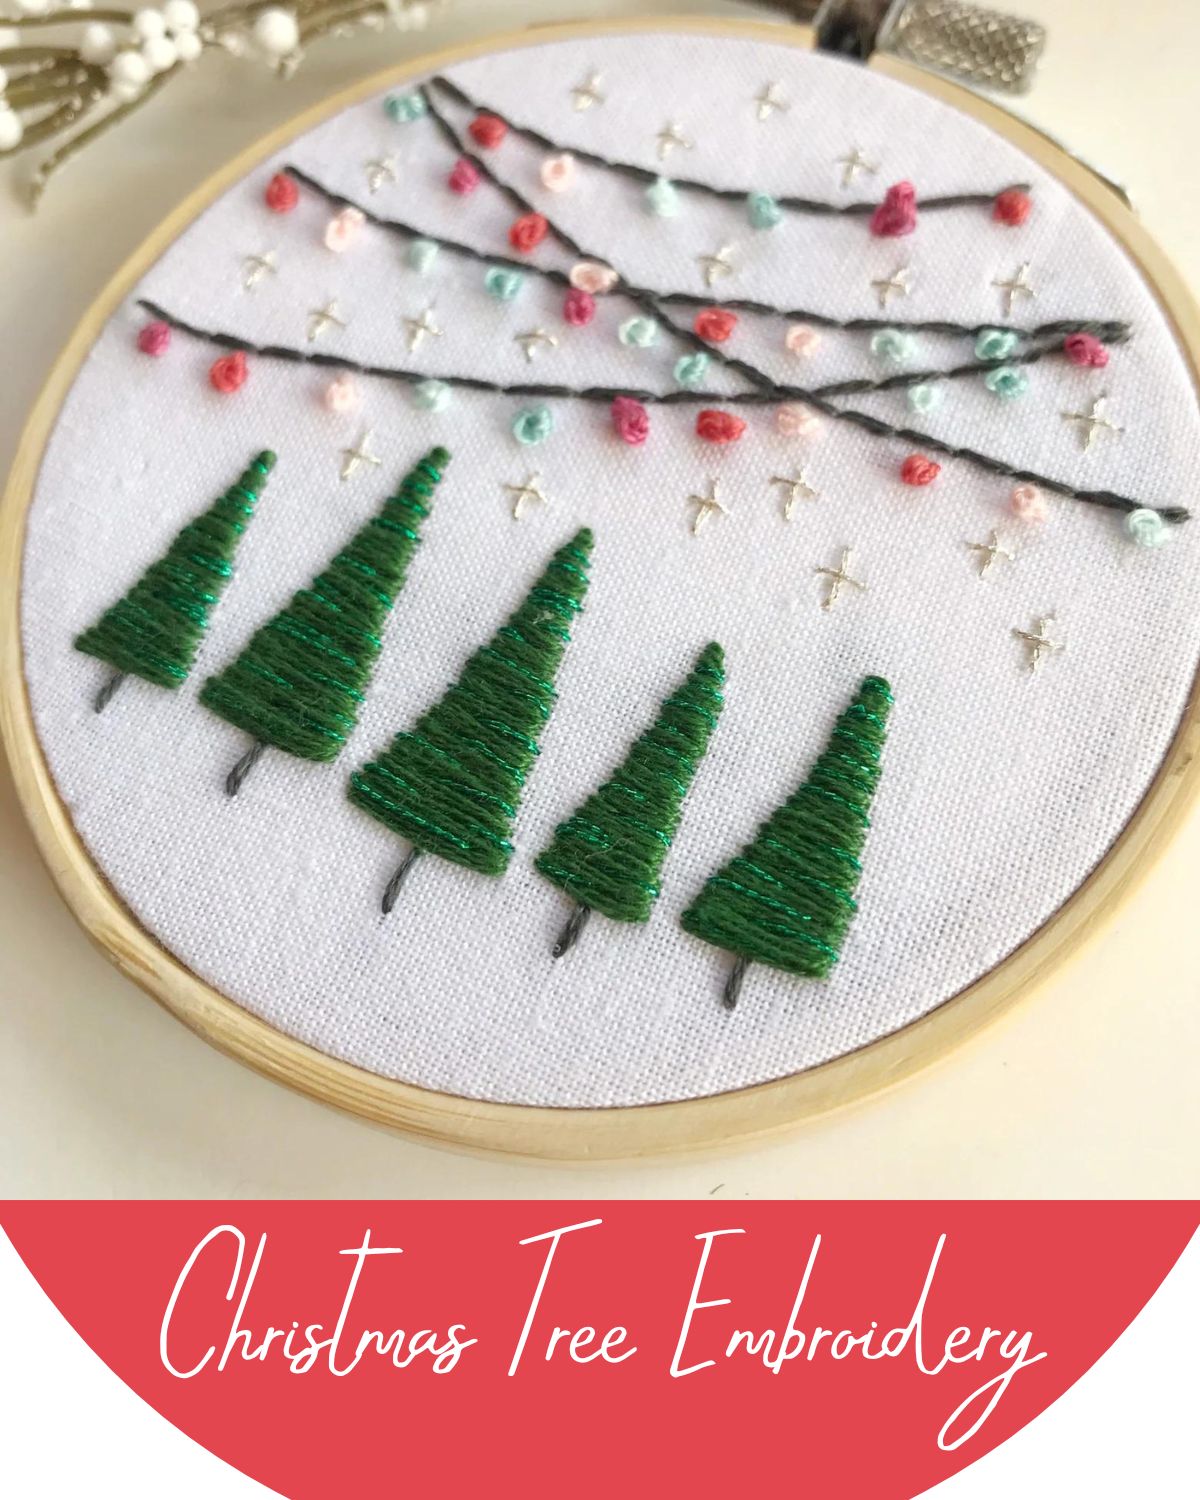 Christmas Trees embroidery 